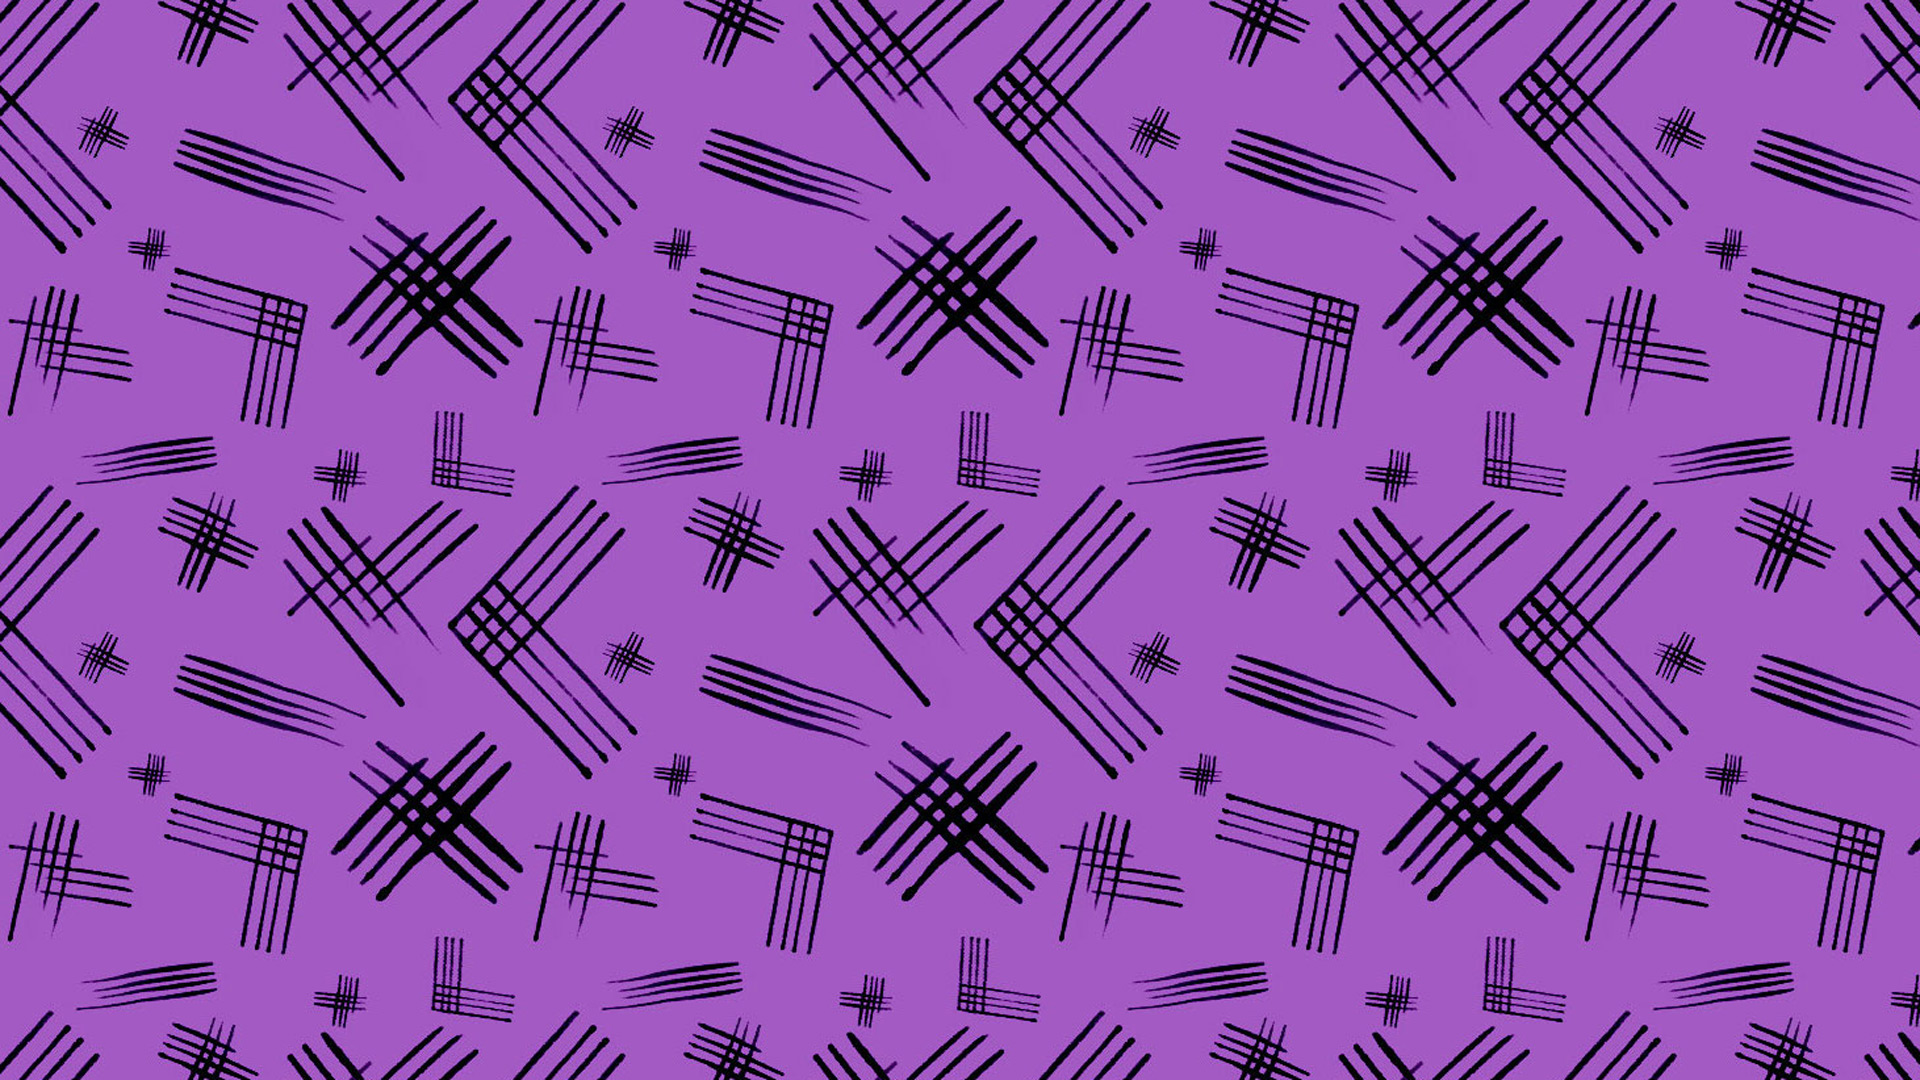 Pattern of crosses, hatches, and lines against a purple background.